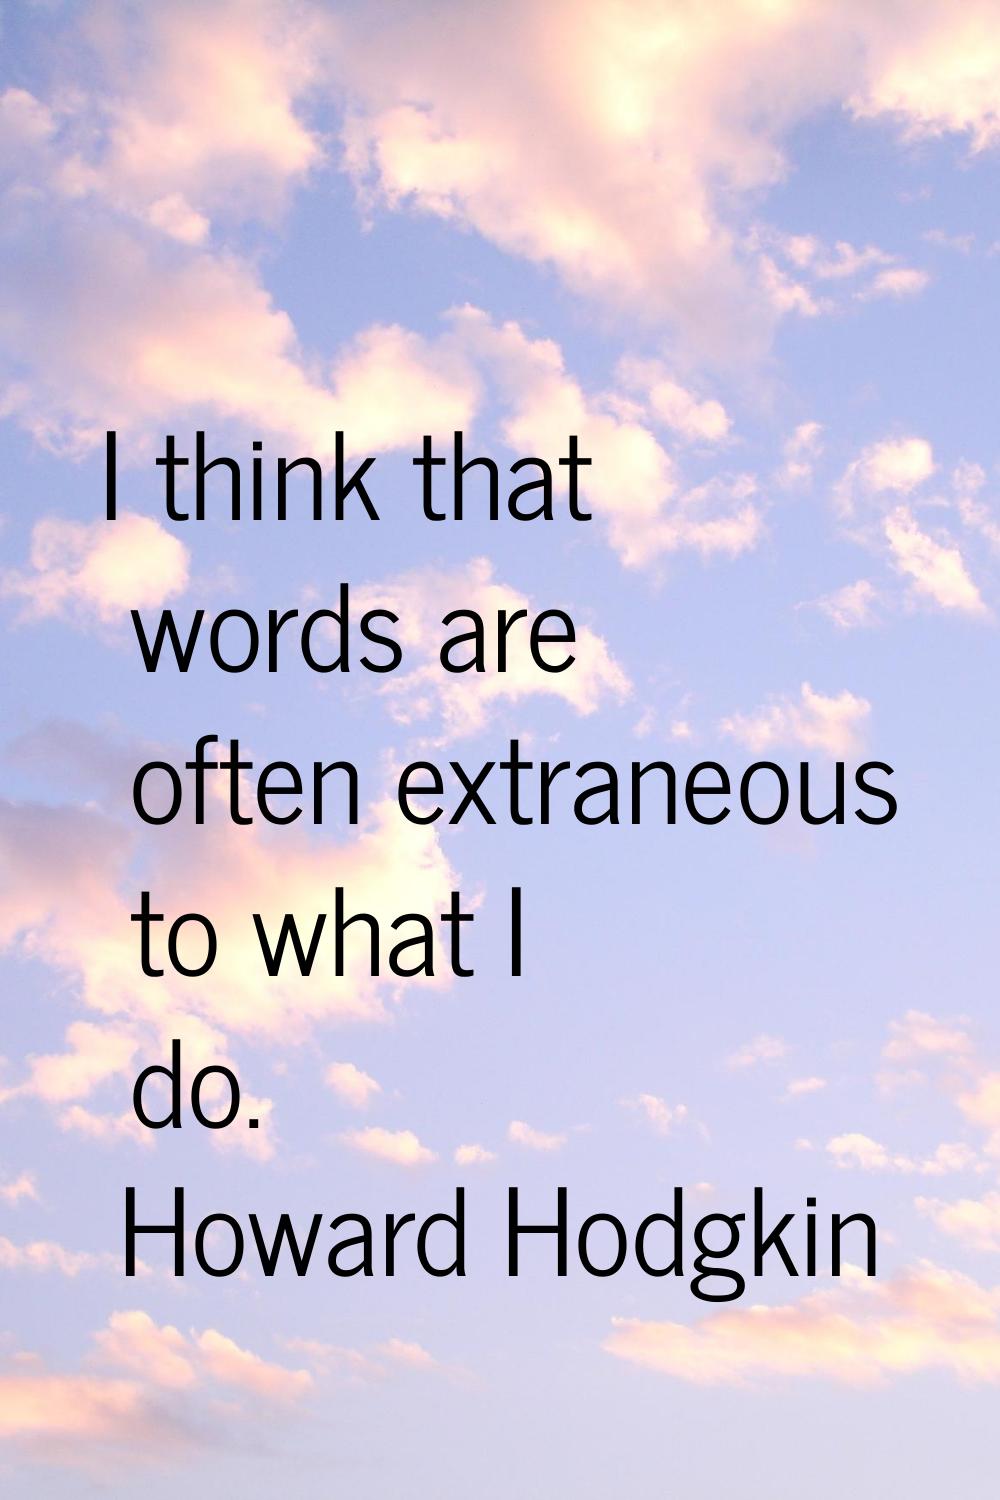 I think that words are often extraneous to what I do.